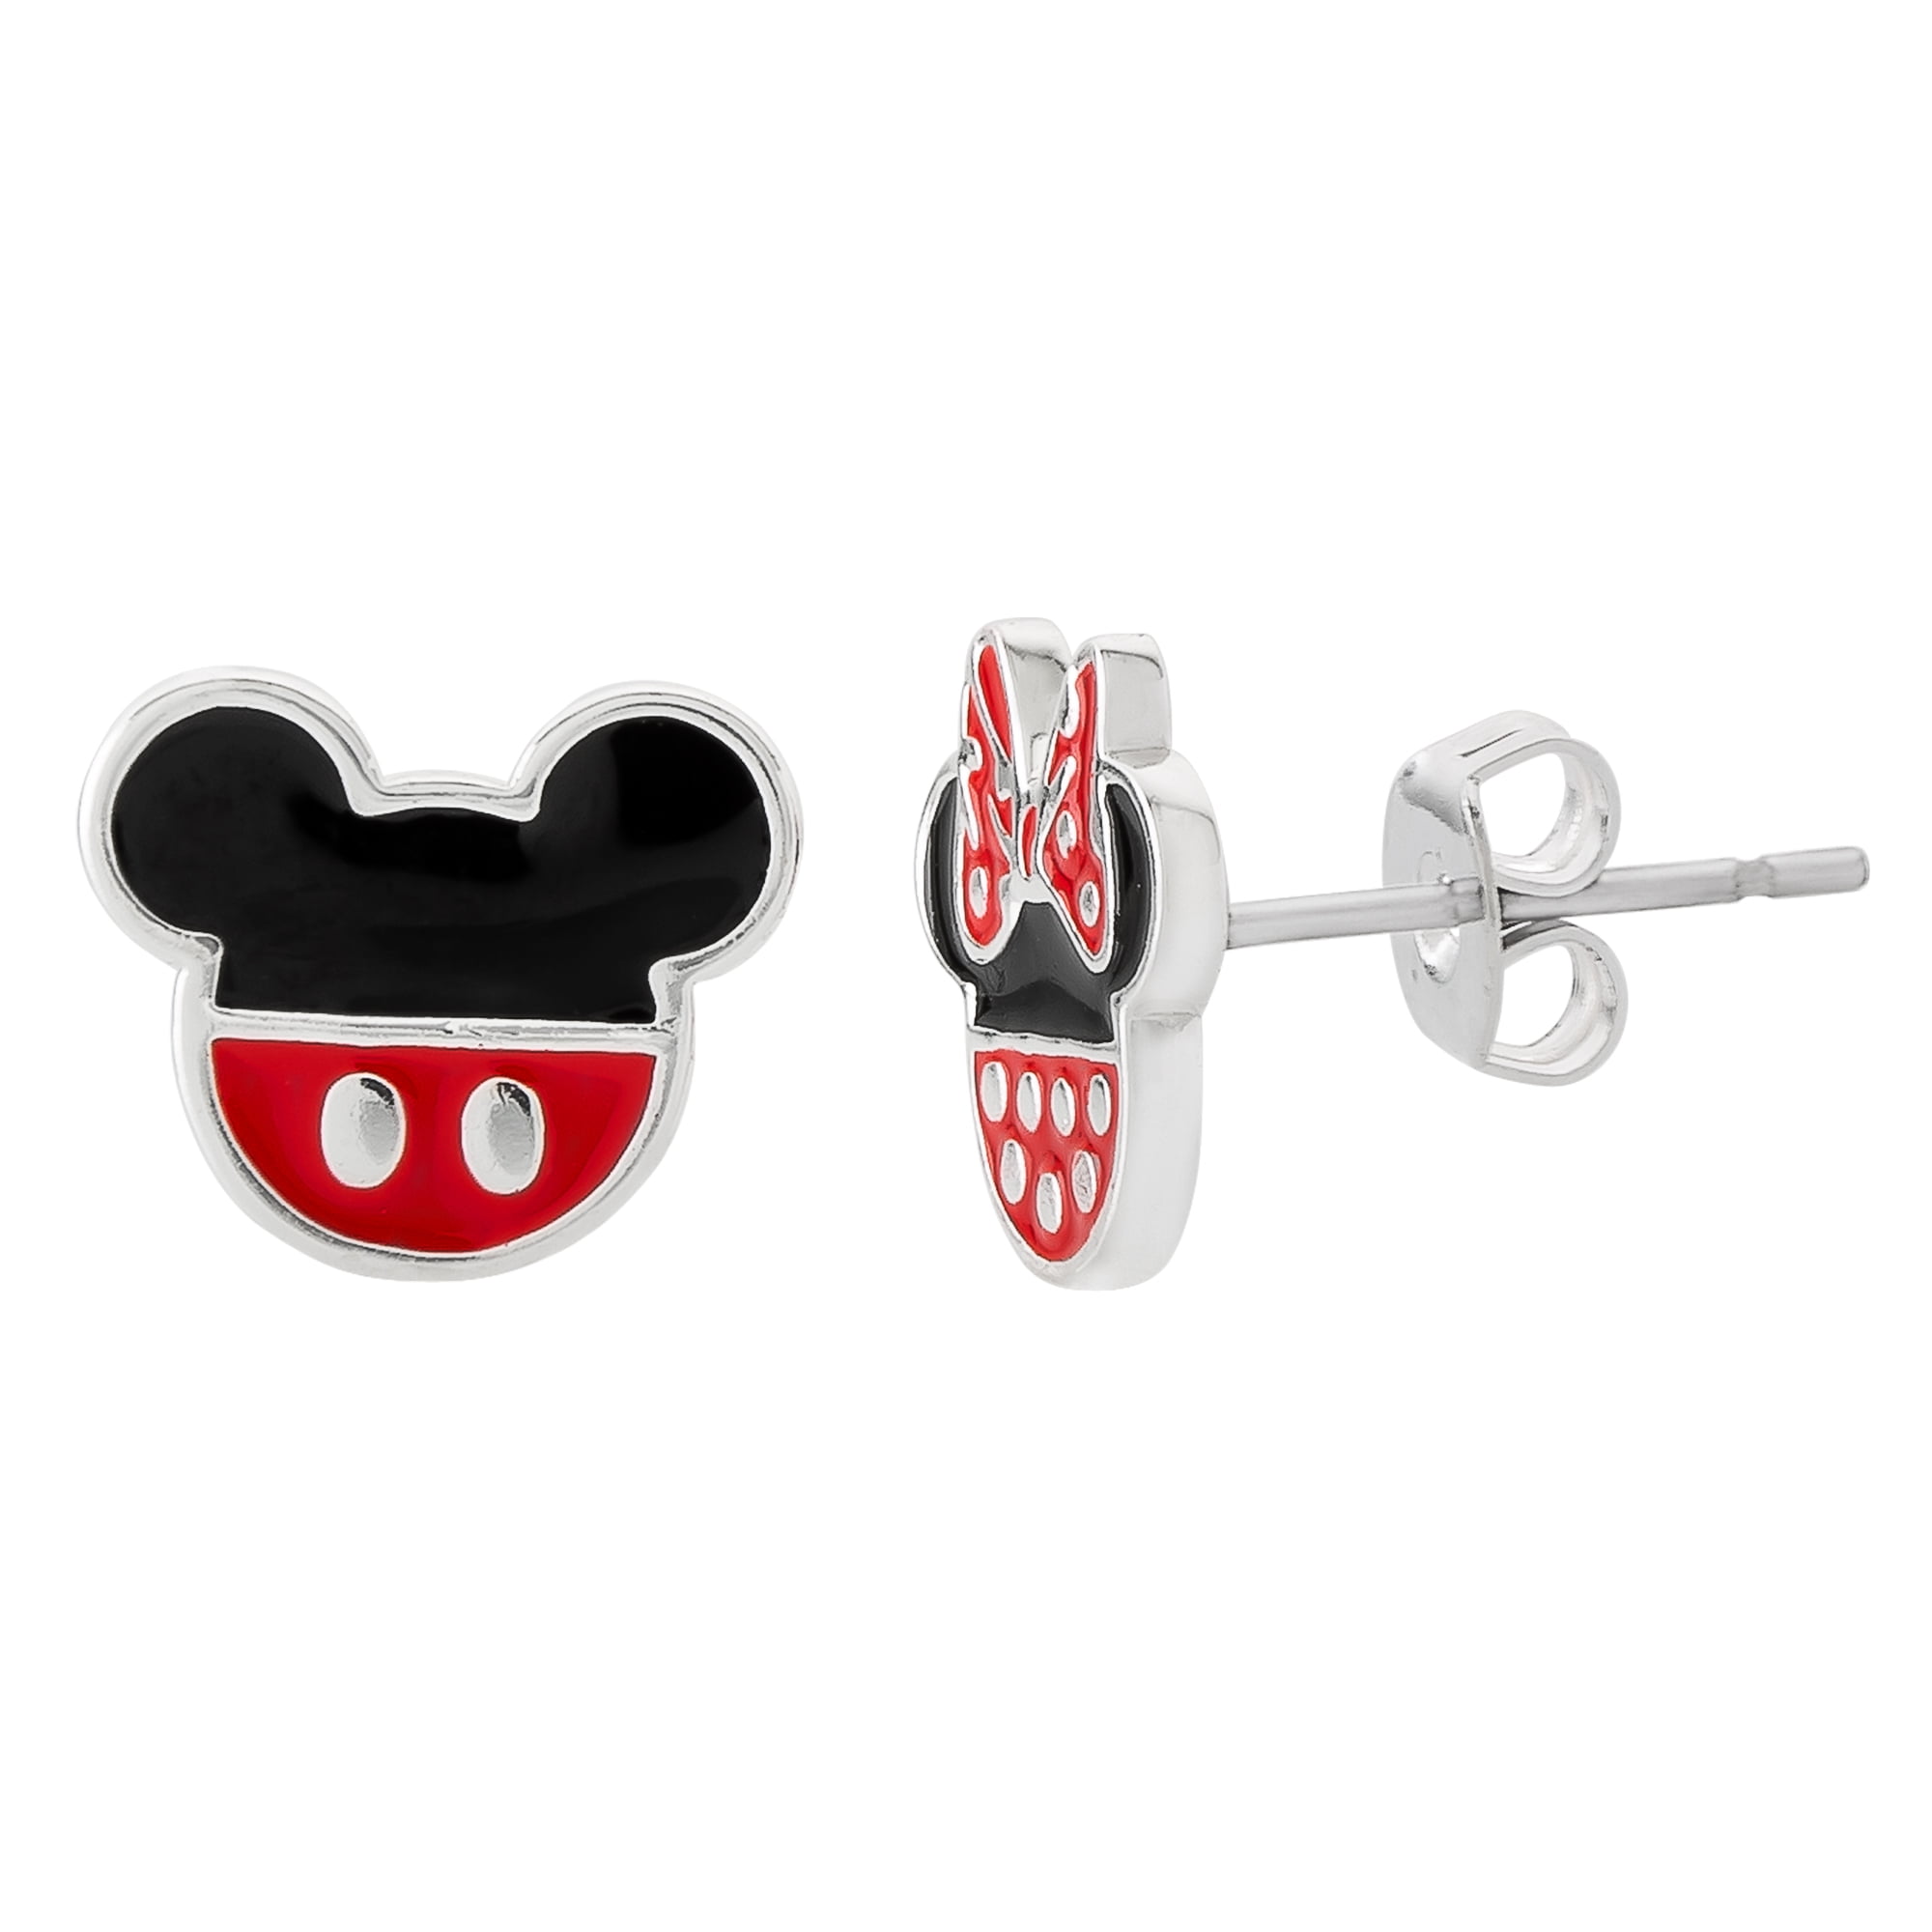 Disney Disney's Mickey Mouse and Minnie Mouse Mismatched